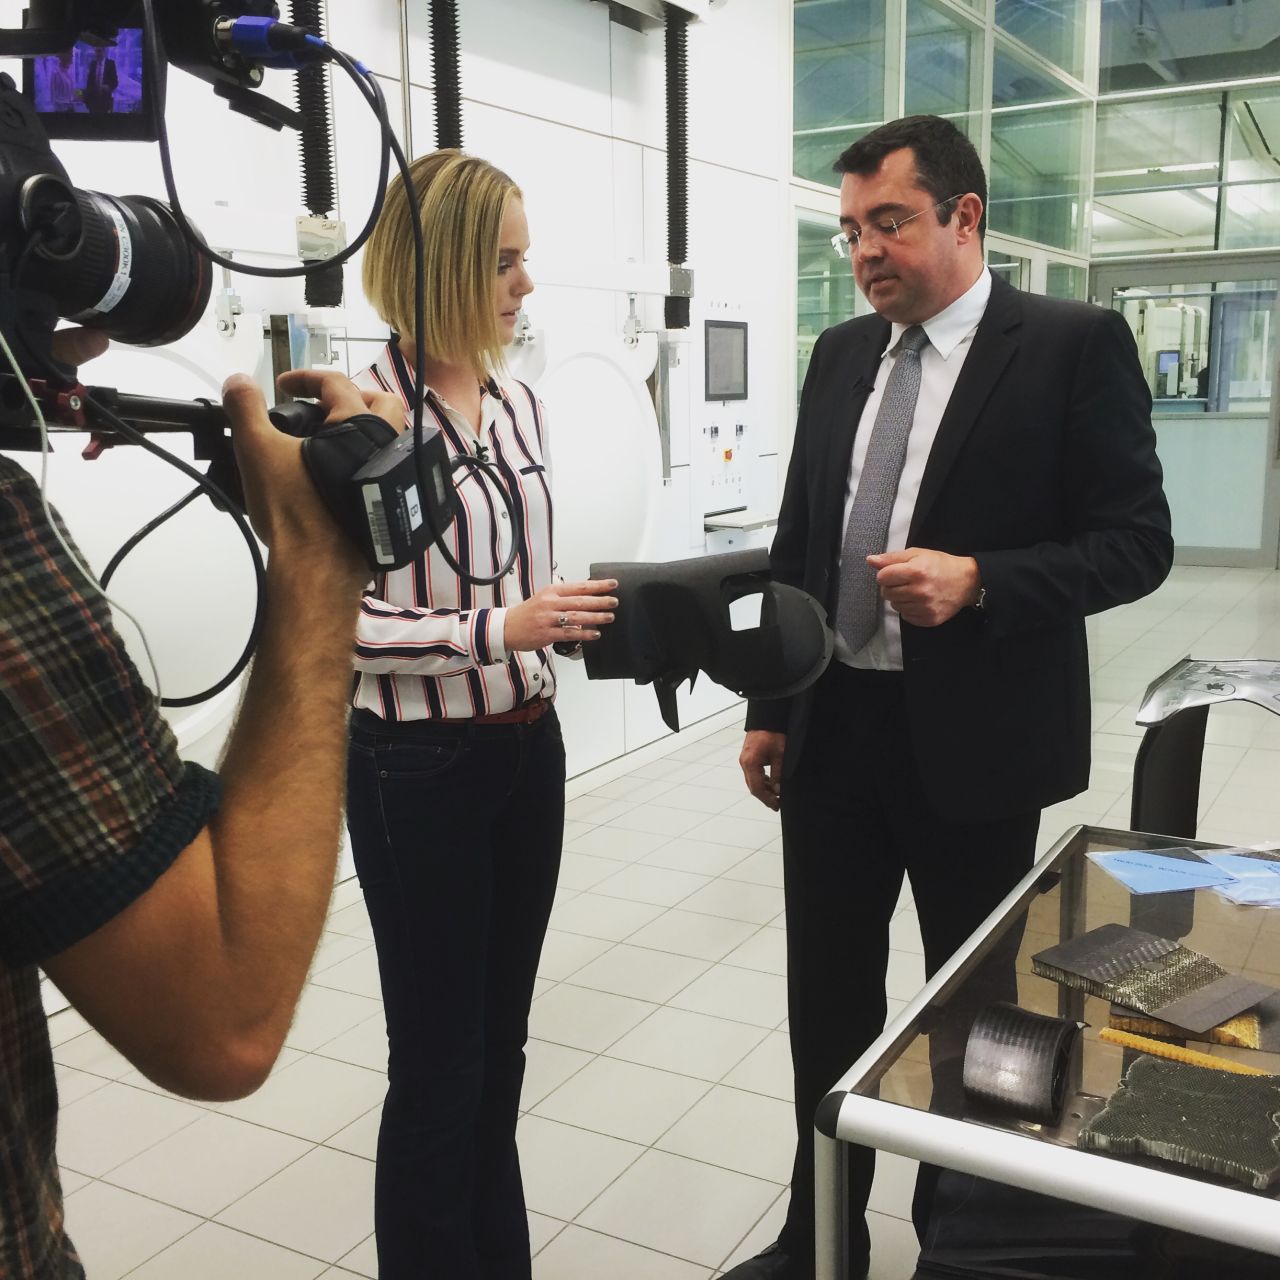 McLaren racing director Eric Boullier shows CNN sports anchor Amanda Davies some of the carbon fiber parts used to build an F1 car. "3D printing is something we are looking at for the future to make more complex parts," Boullier tells CNN.